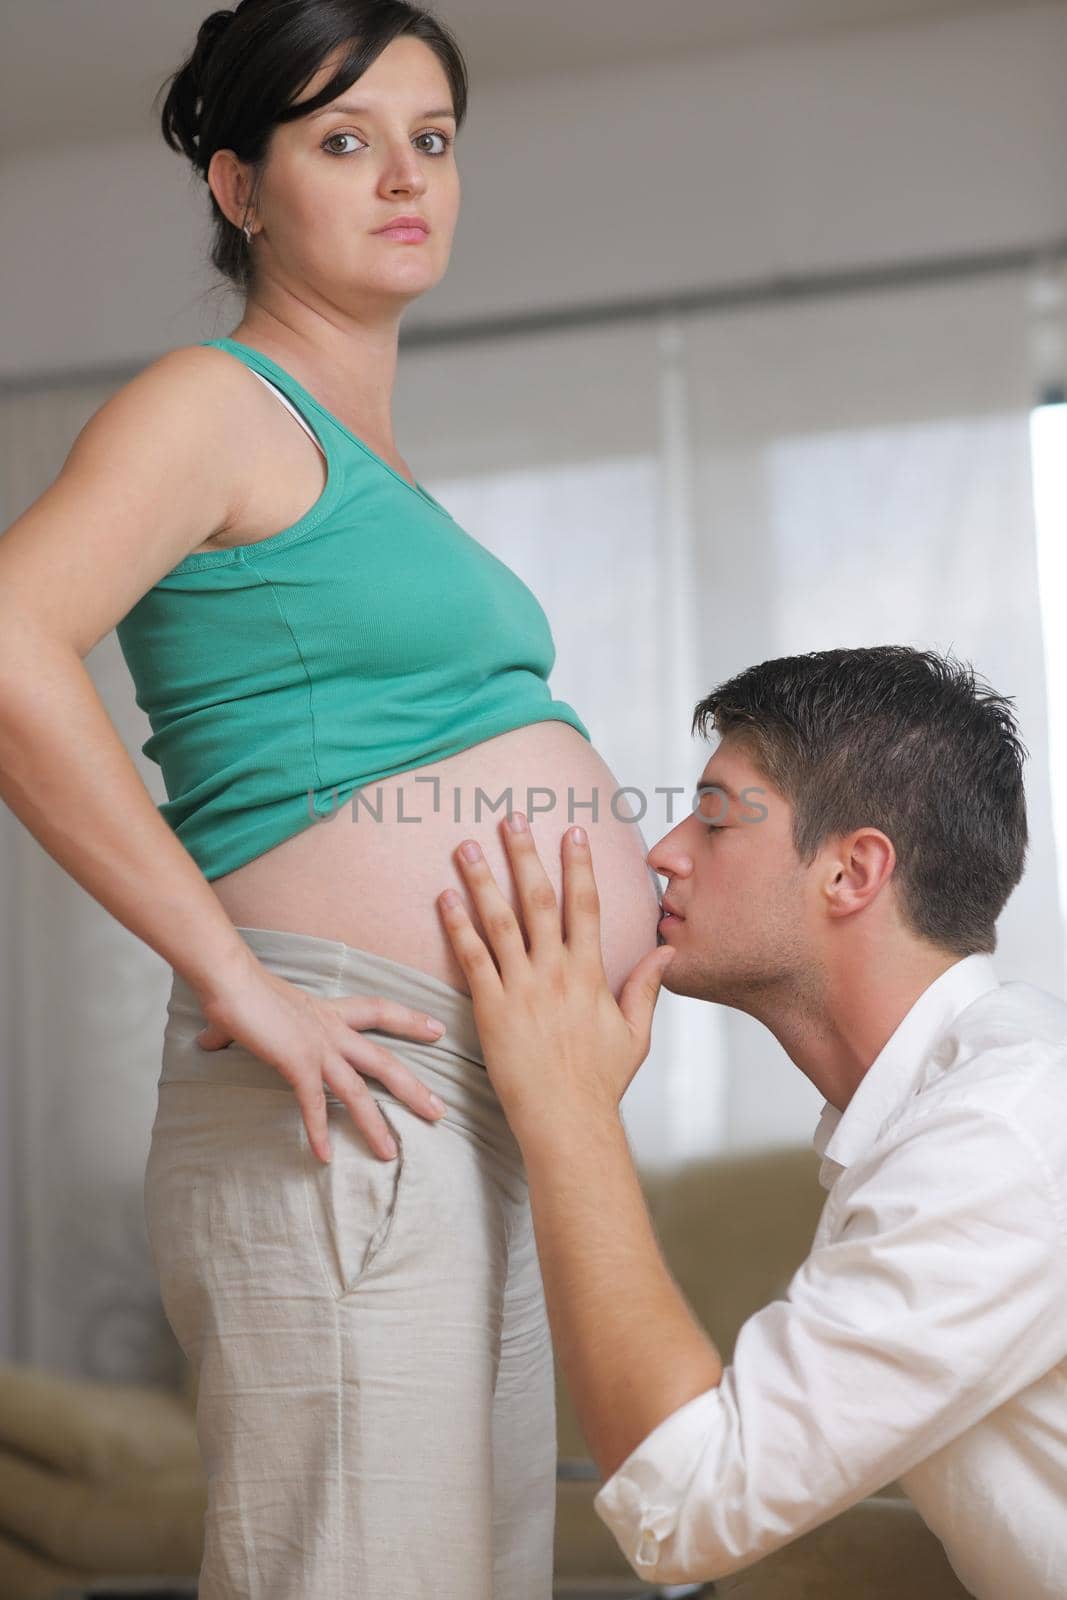 happy young cuple, pregnant woman